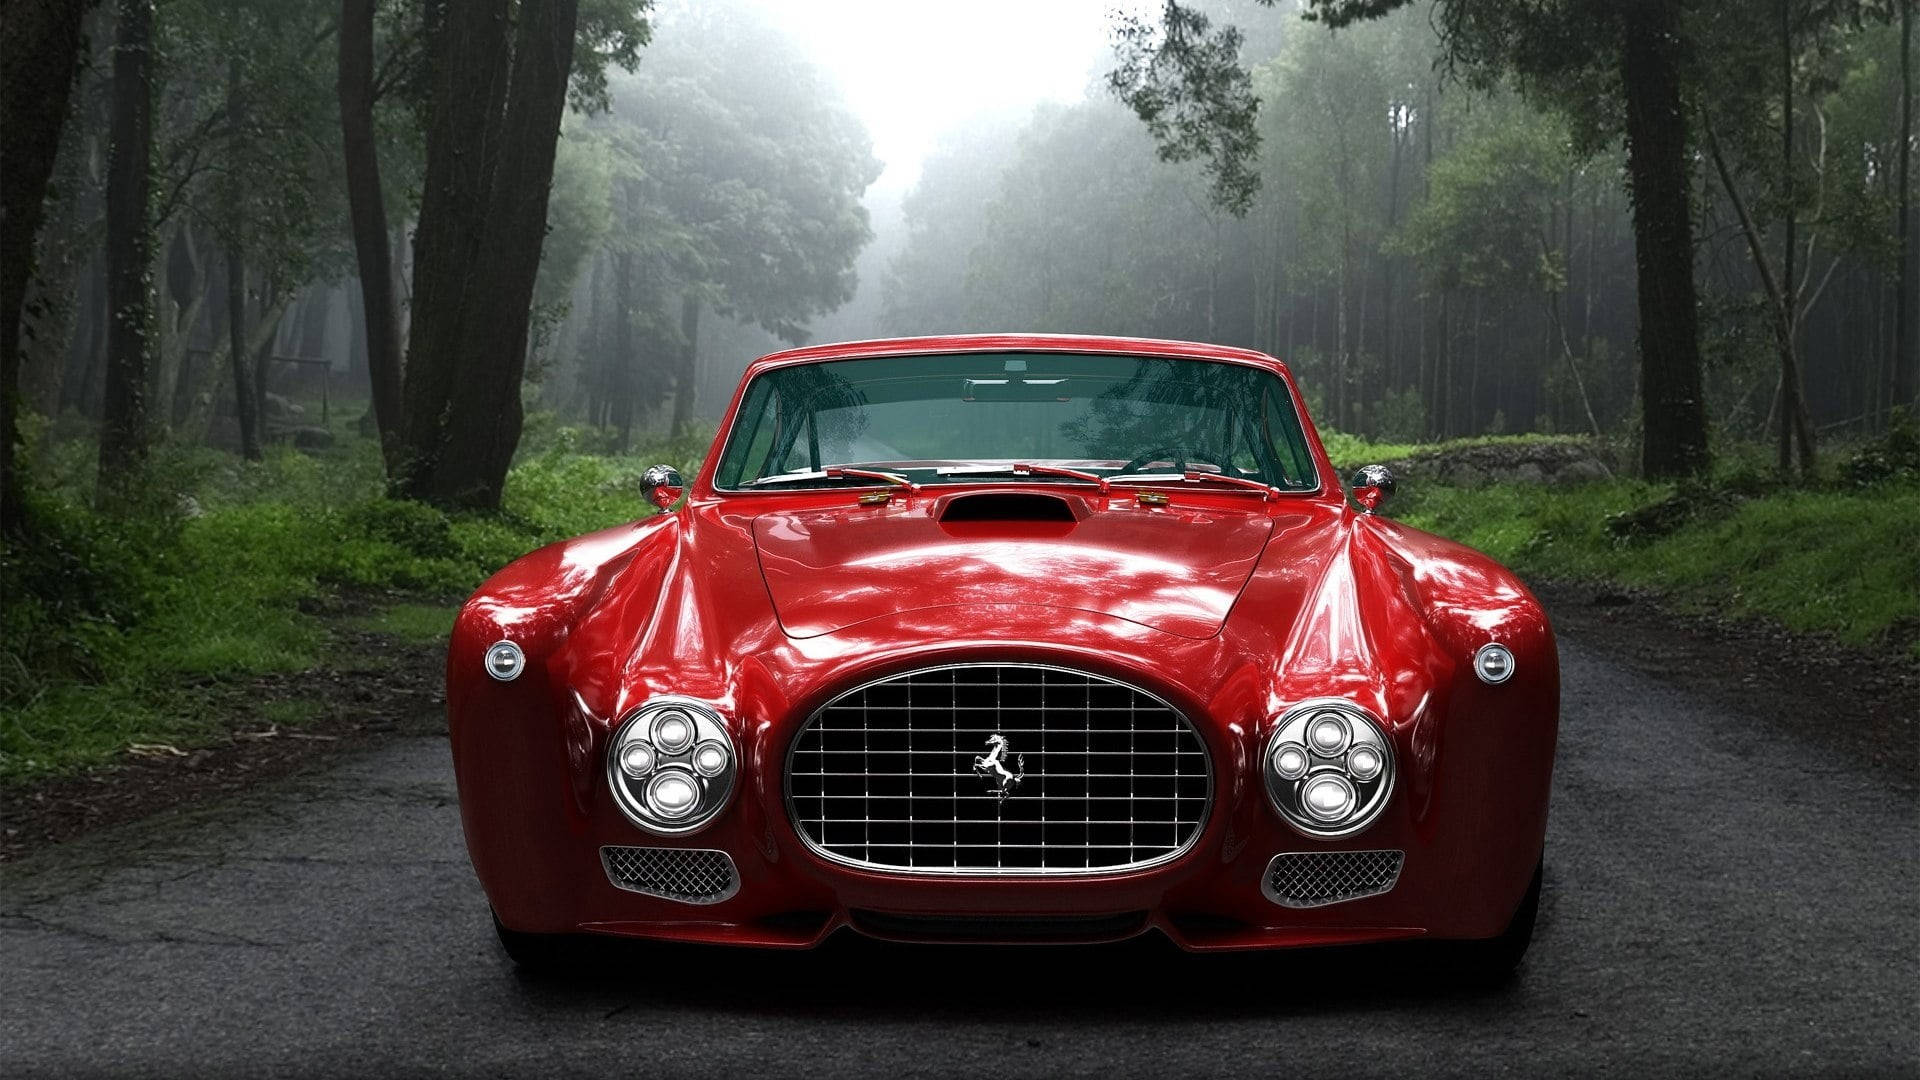 Hd Red Car In Forest Wallpaper